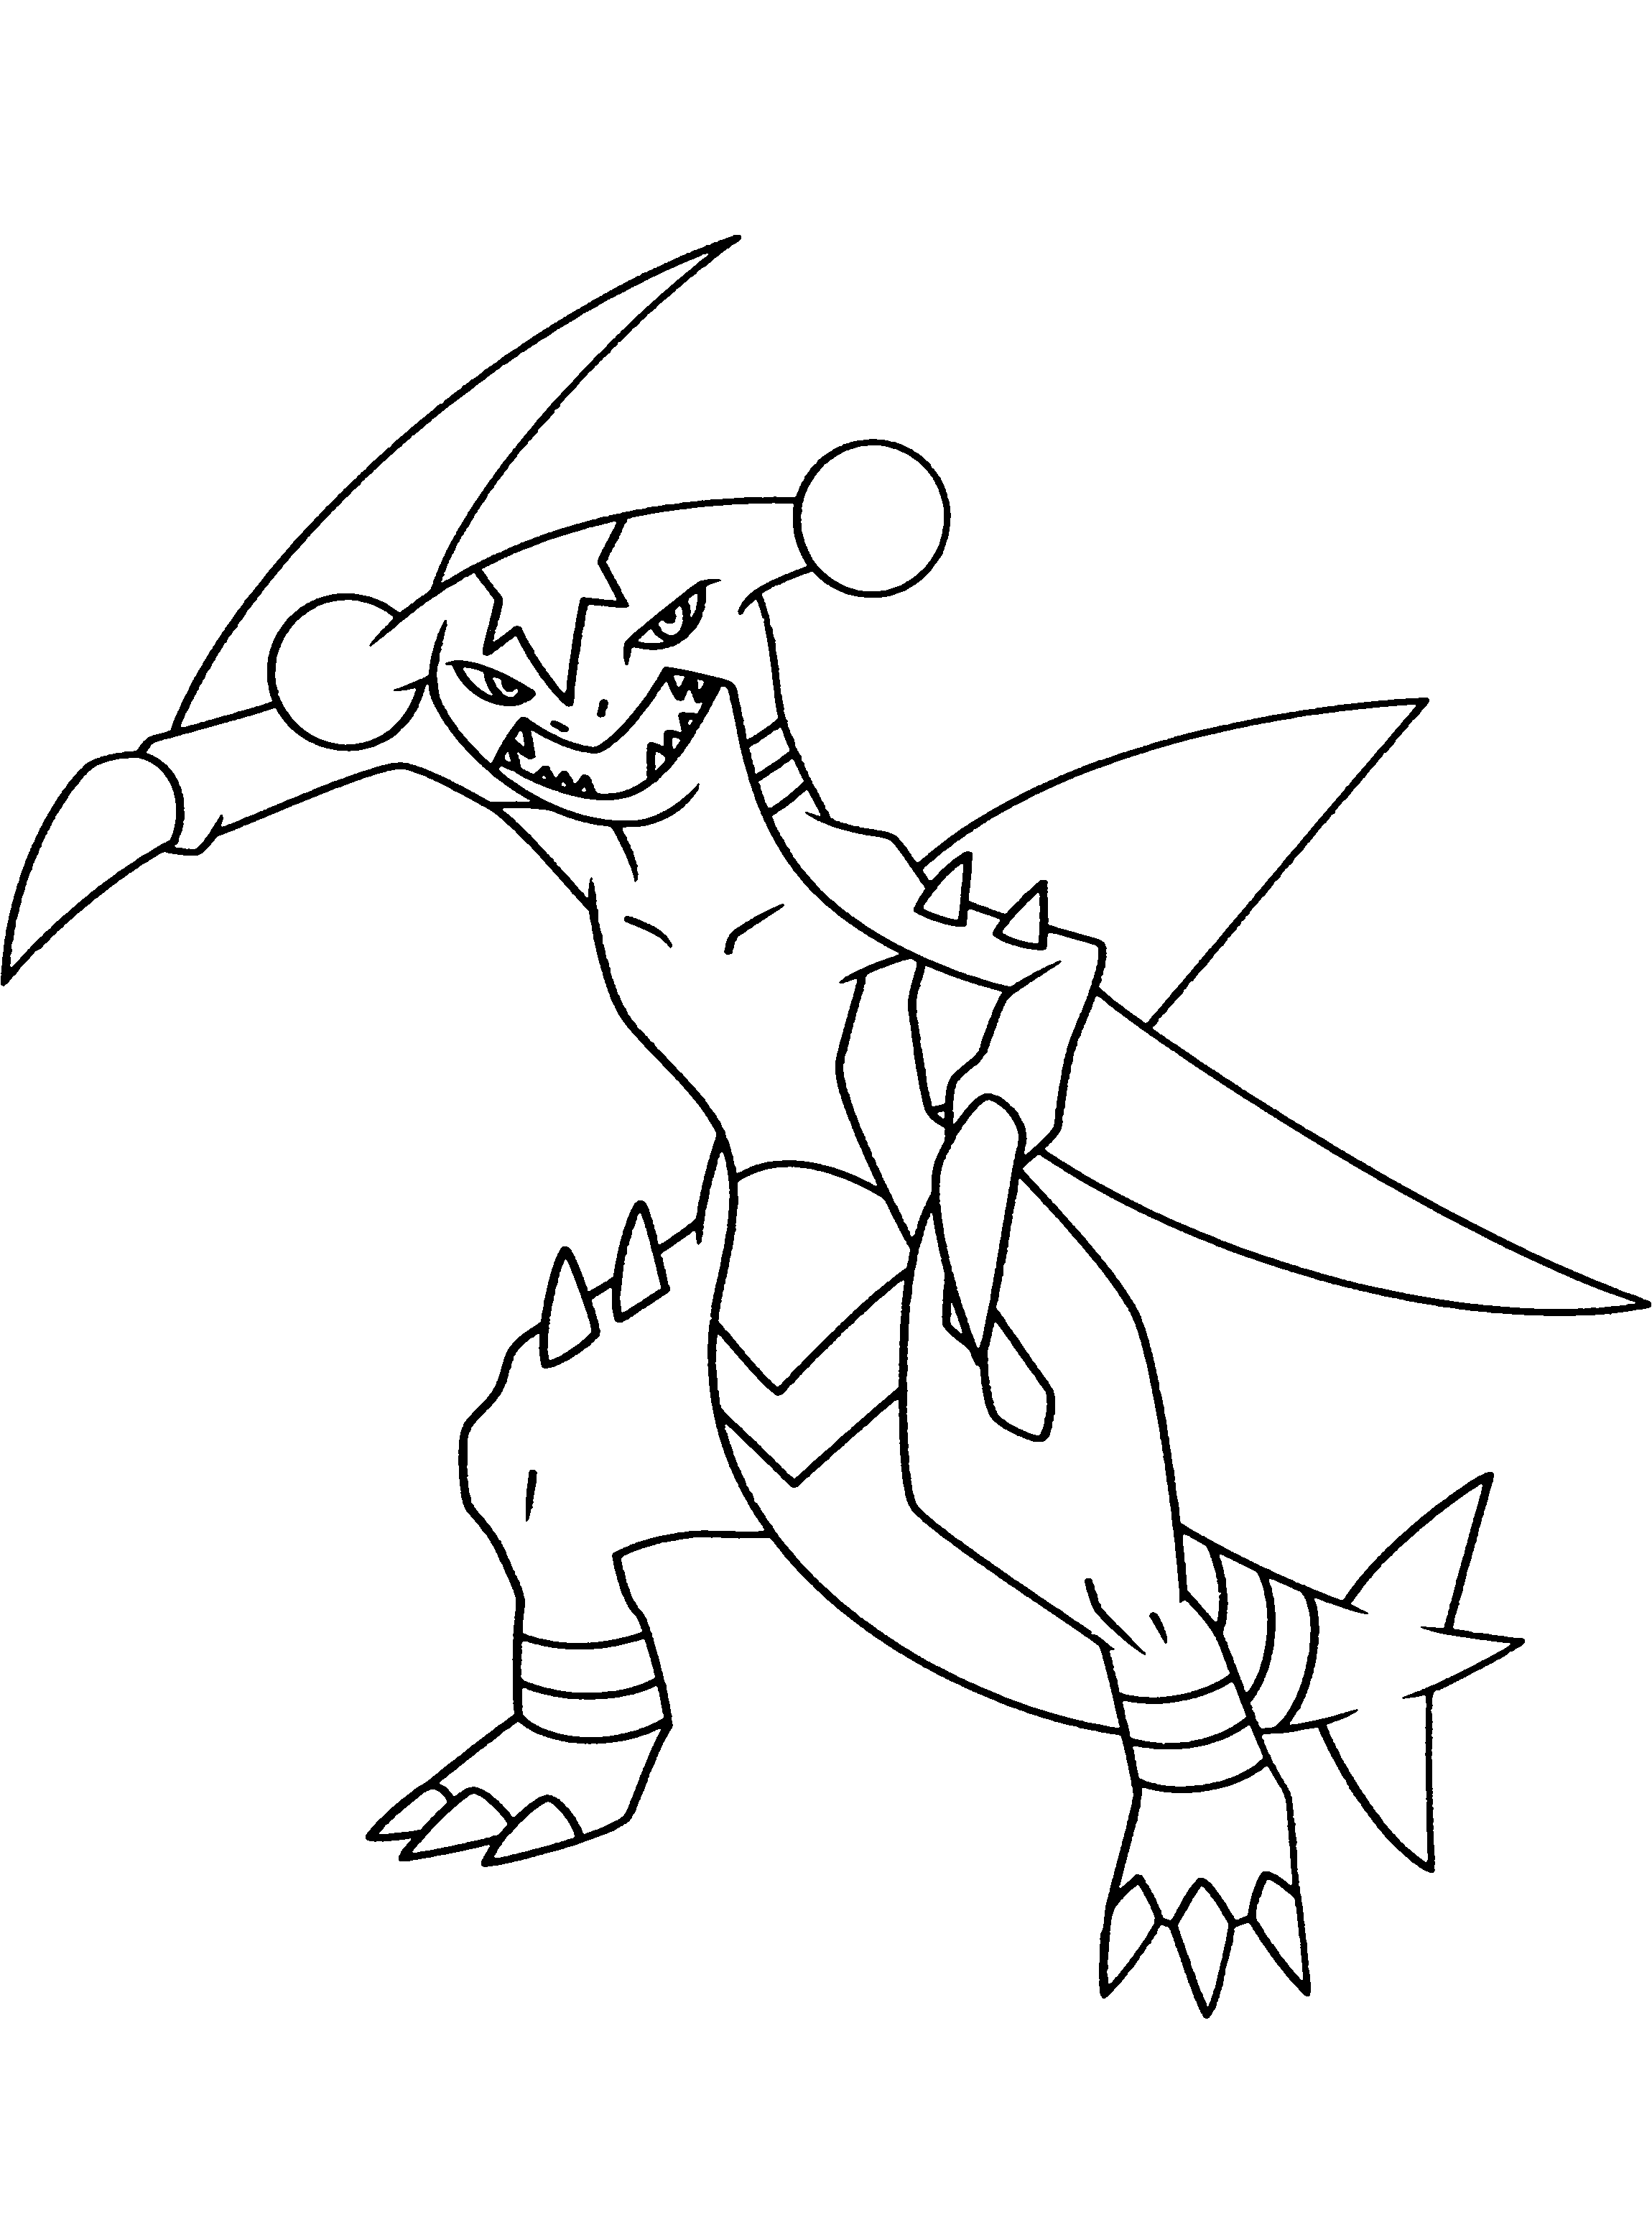 Pokemon Pidgey Coloring Pages Crokky Coloring Pages